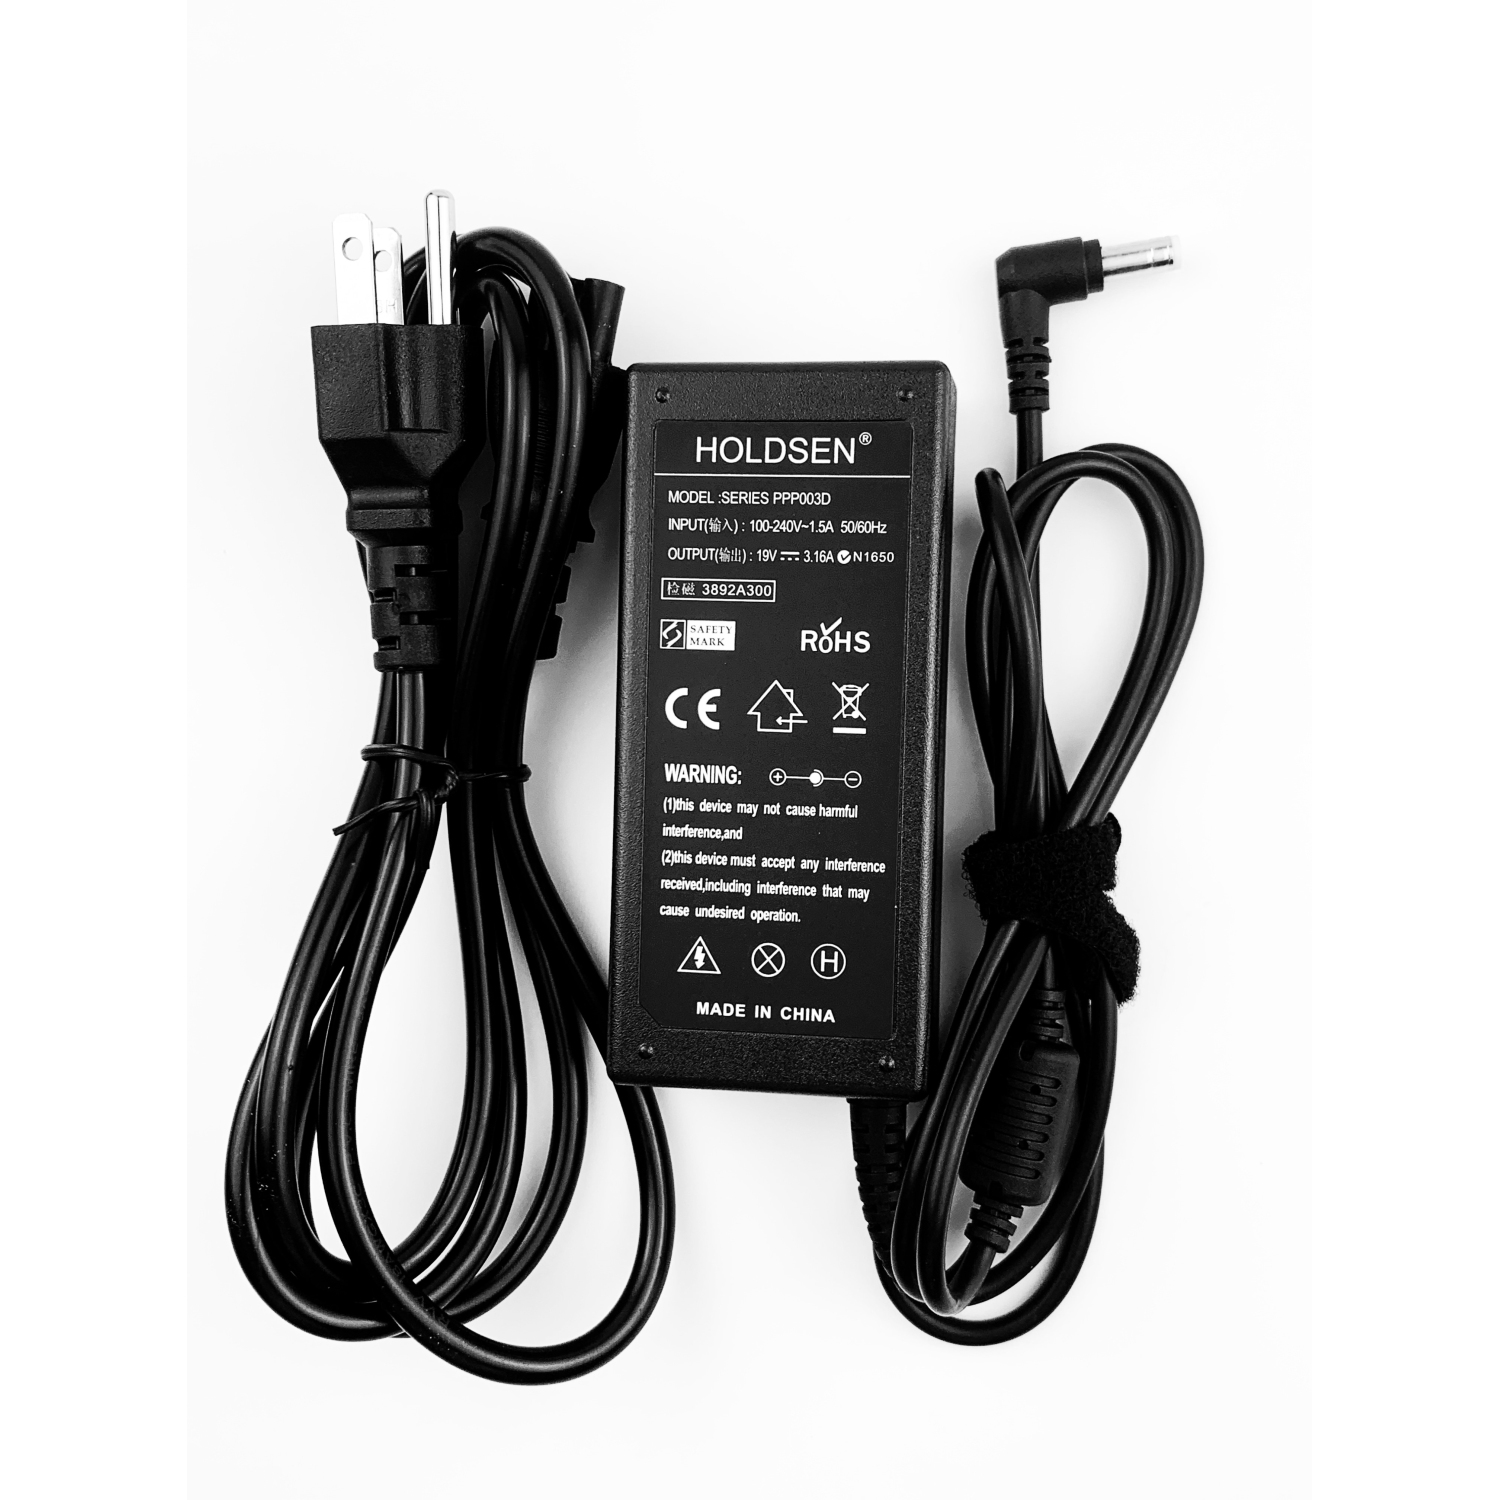 19V 2.37A 3.16A 60W AC adapter power cord for HP Pavilion 23XW 27 27xi LCD monitors ONLY